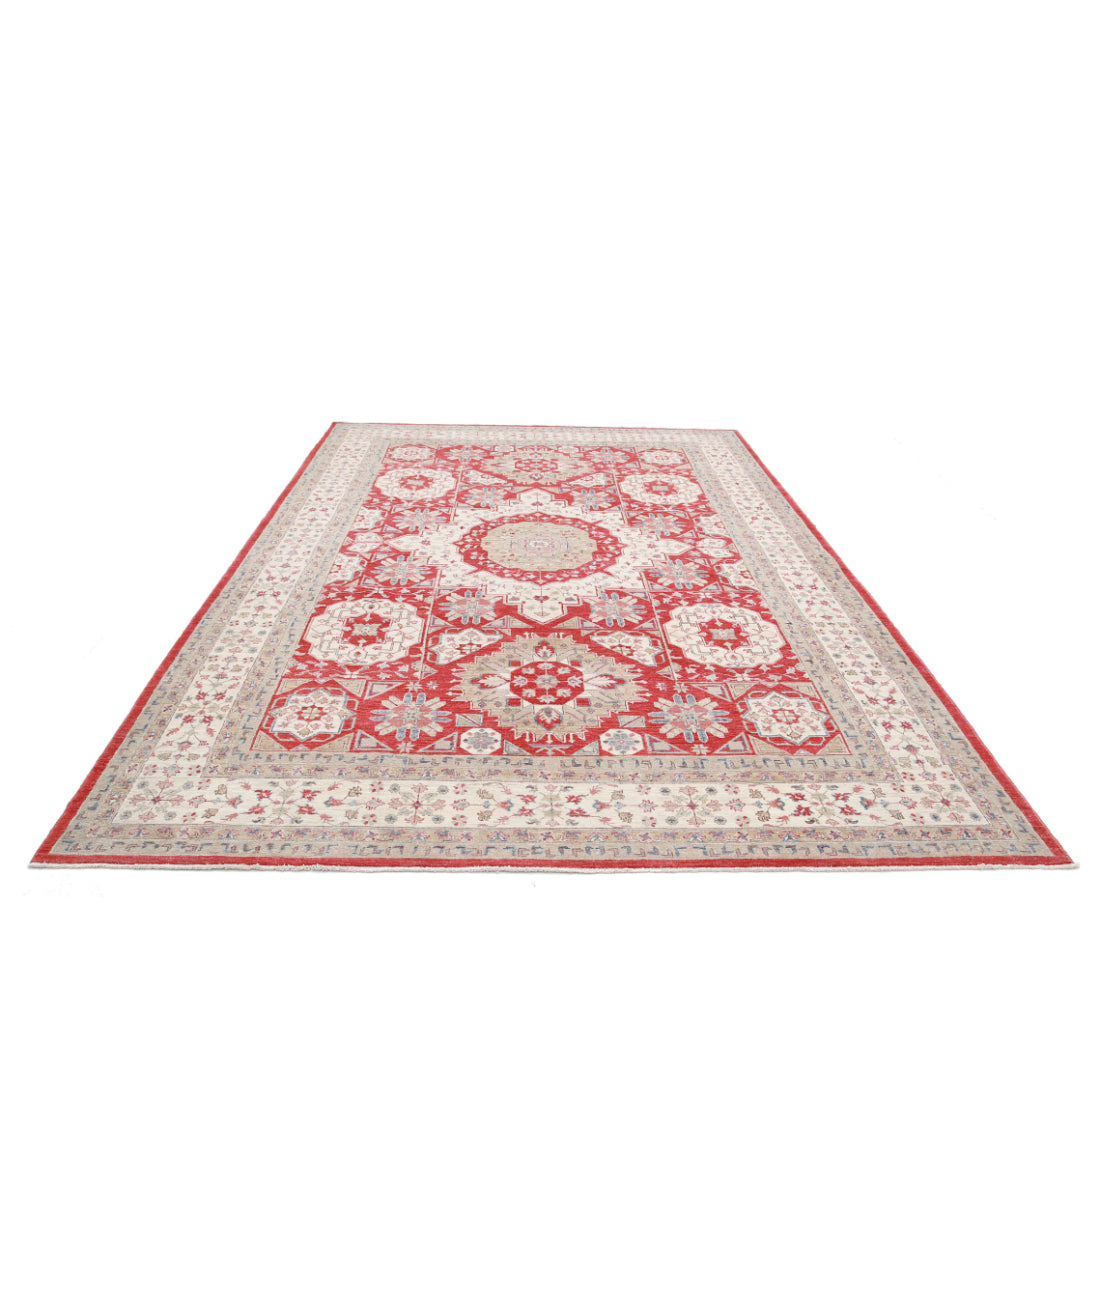 Ziegler 8'3'' X 12'4'' Hand-Knotted Wool Rug 8'3'' x 12'4'' (248 X 370) / Red / Ivory